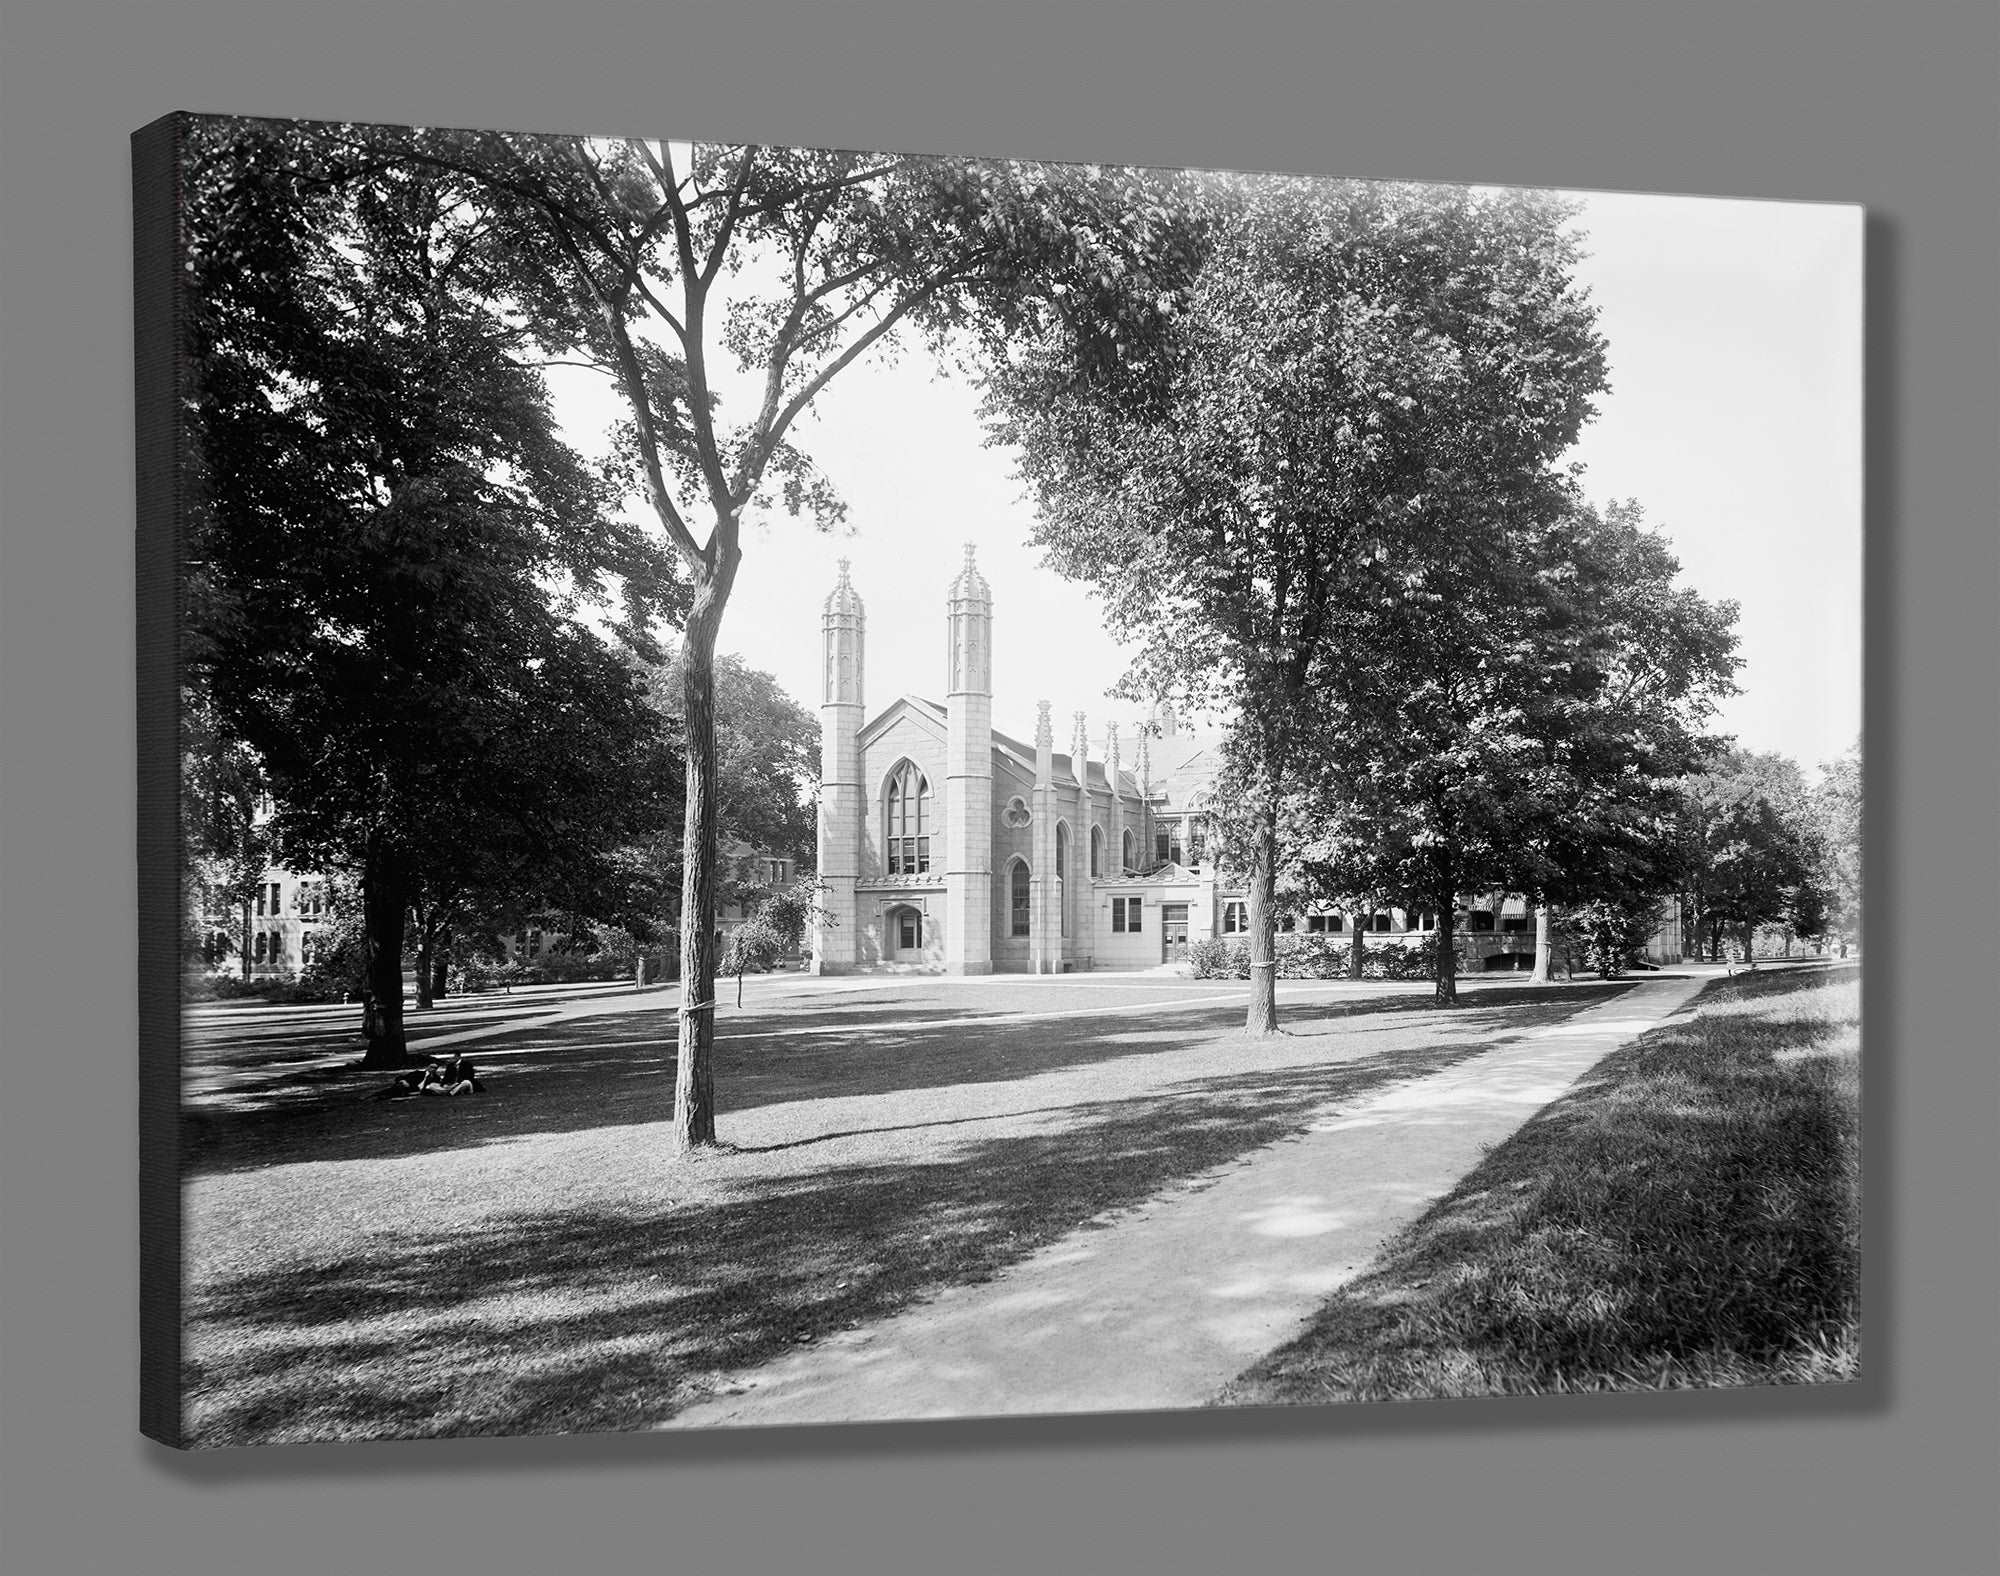 A canvas print reproduction of a vintage photograph of Gore Hall at Harvard